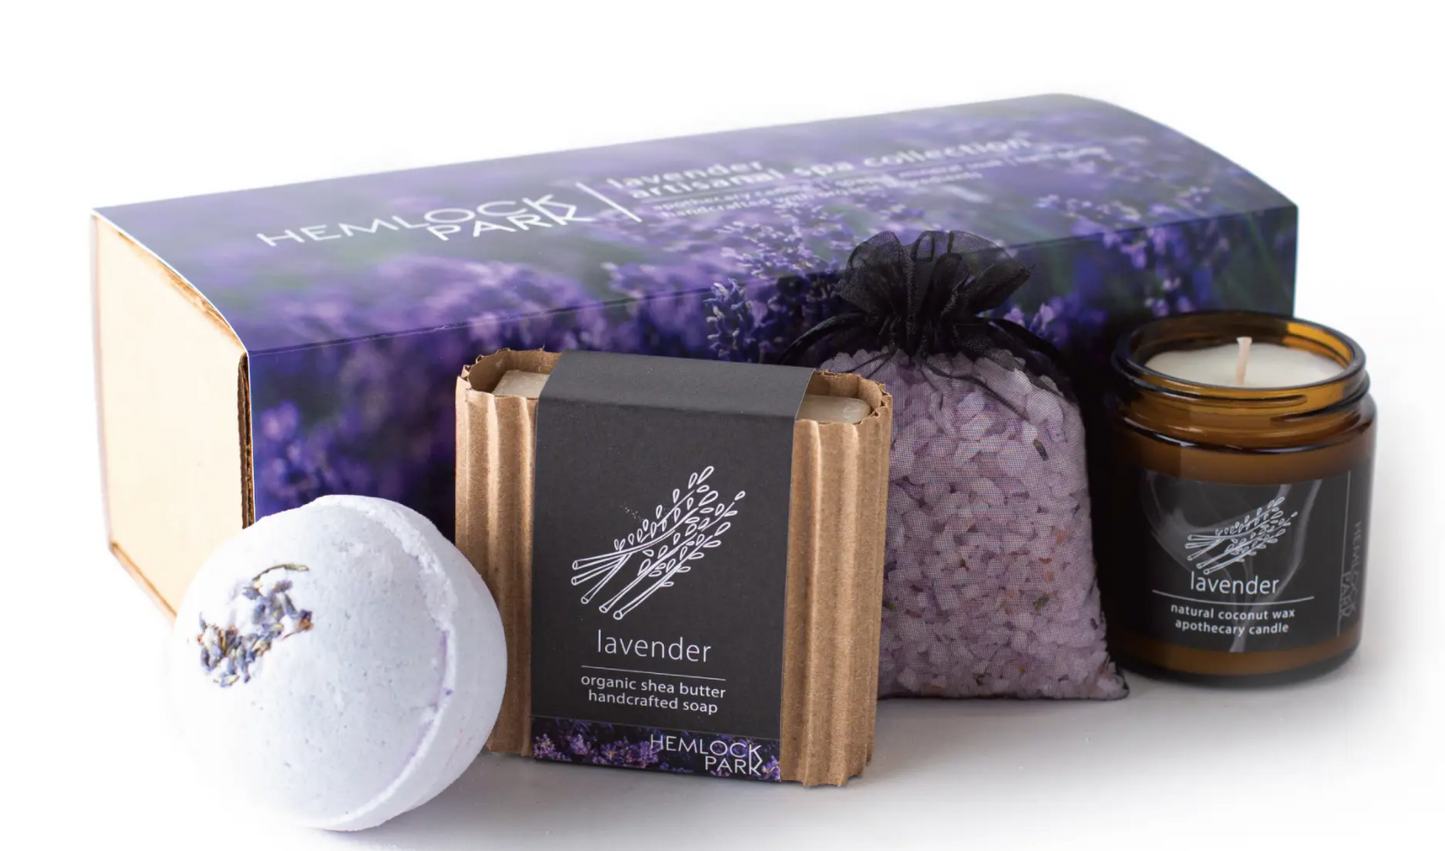 Lavender | Artisanal Spa Collection Gift Box